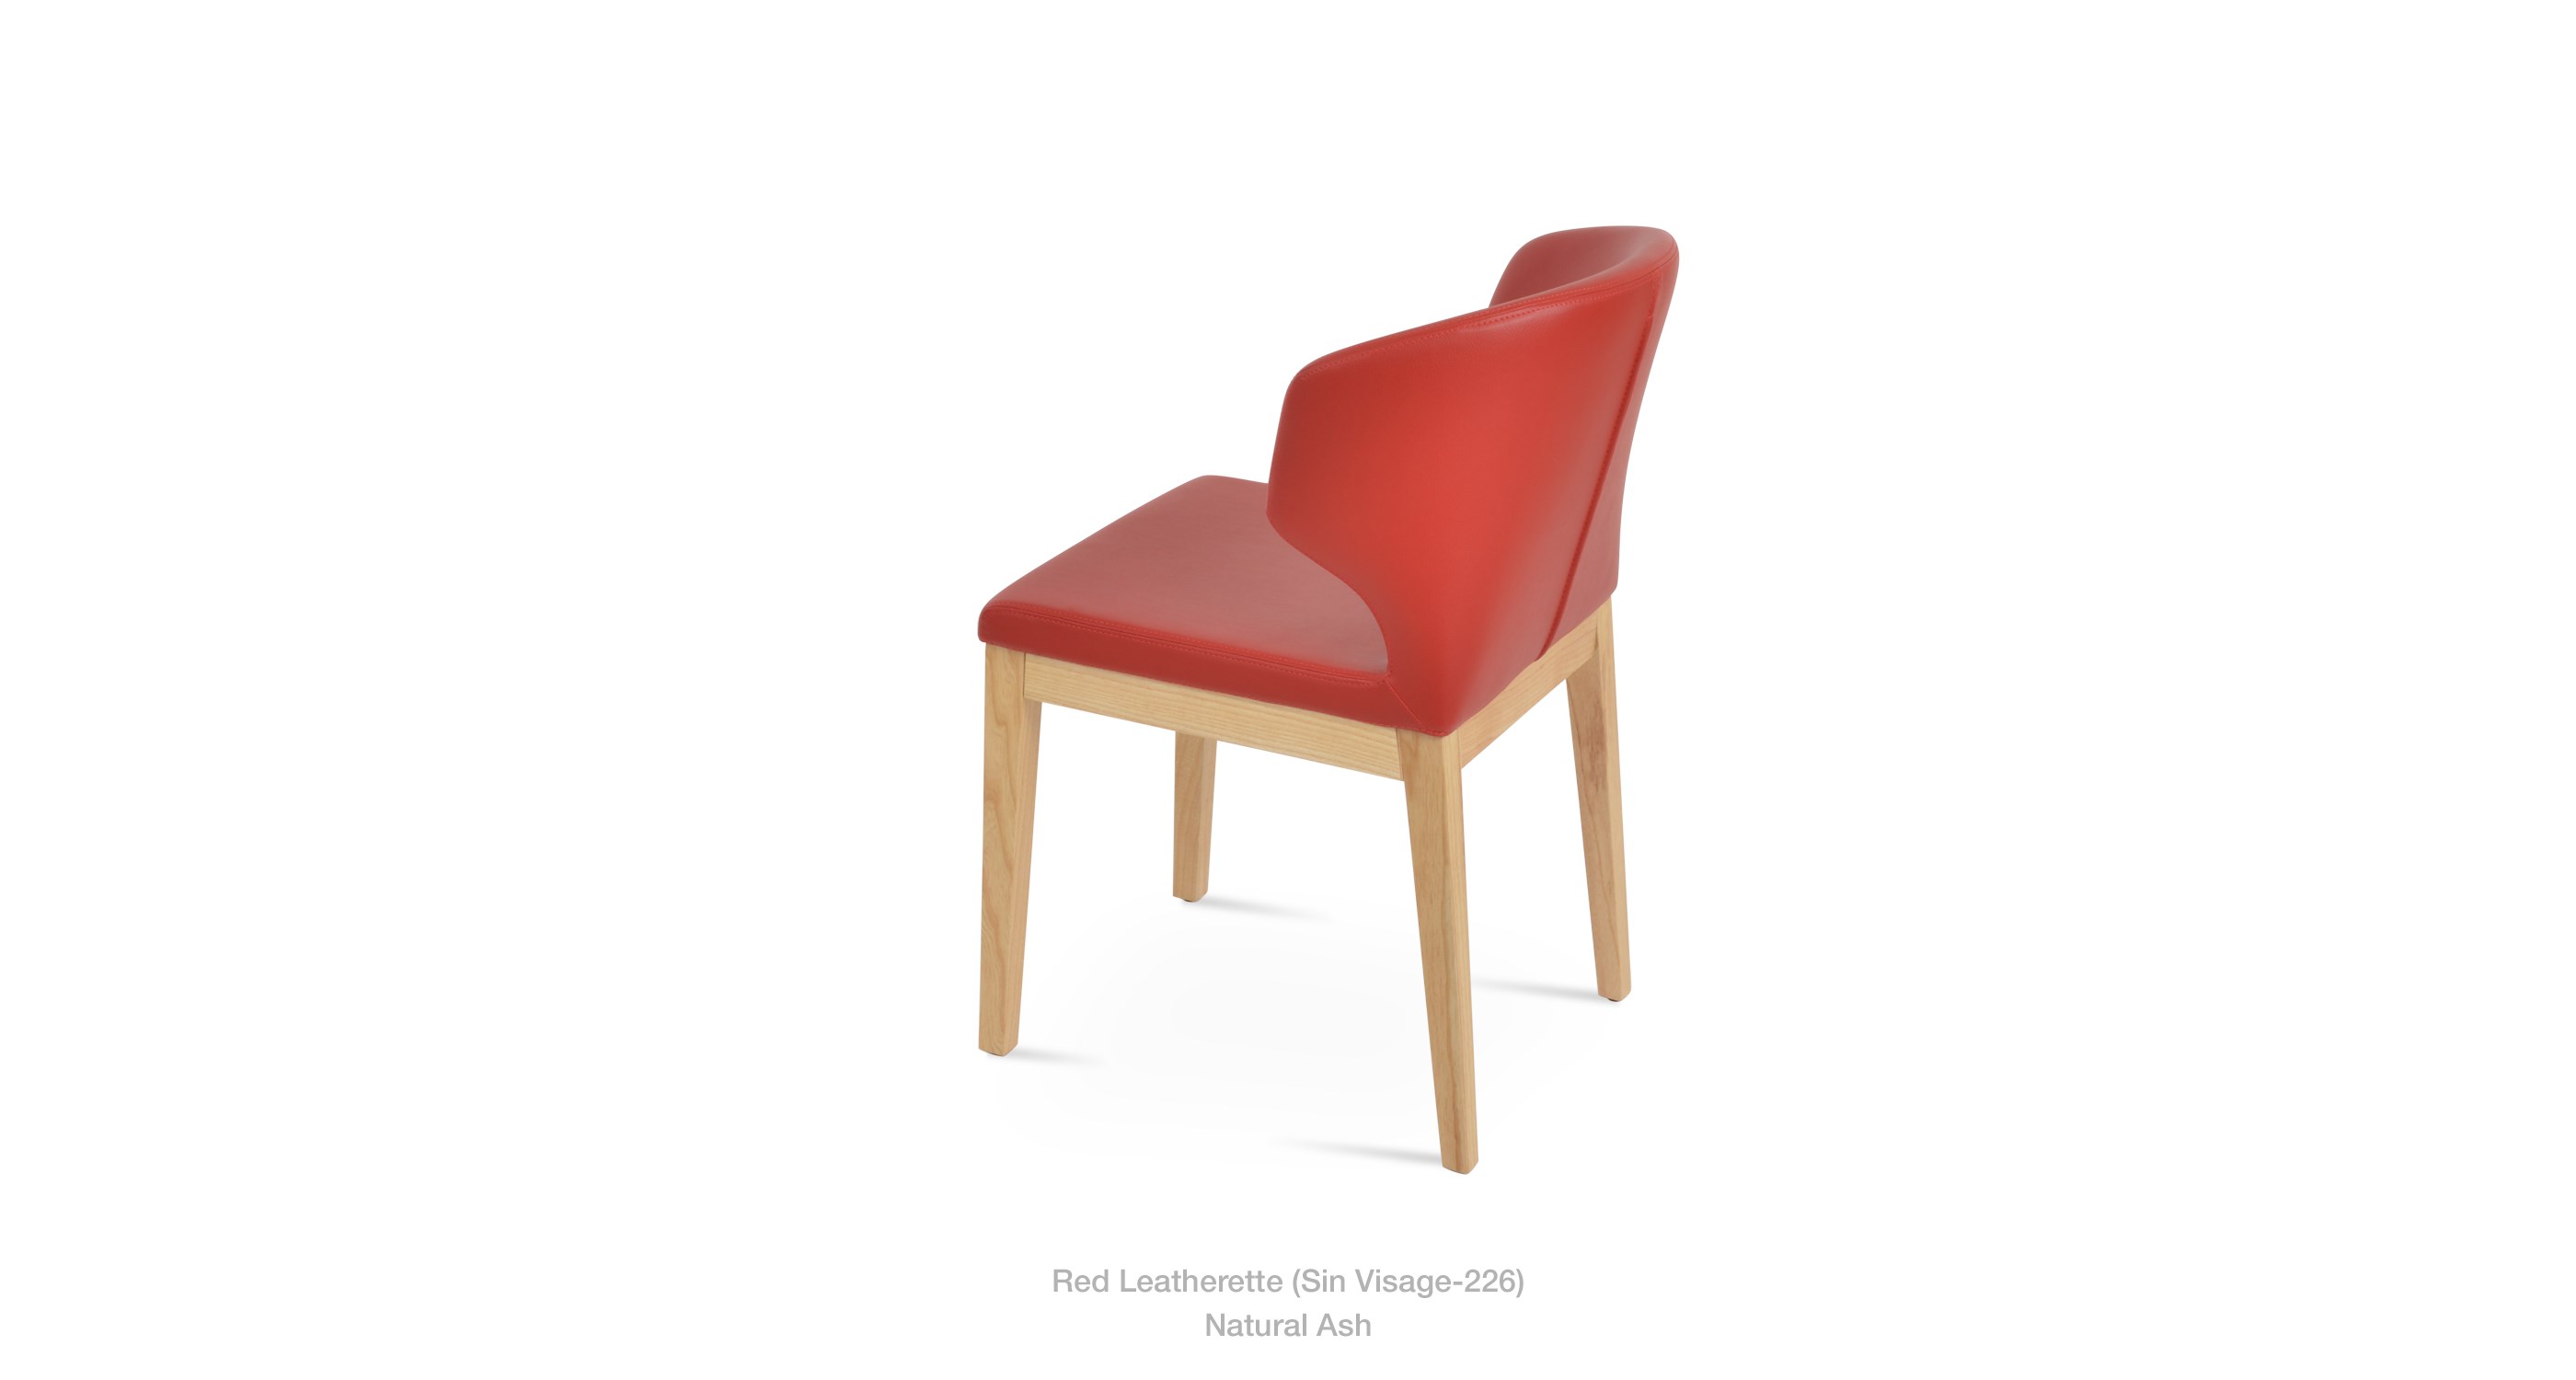 red leatherette - natural ash